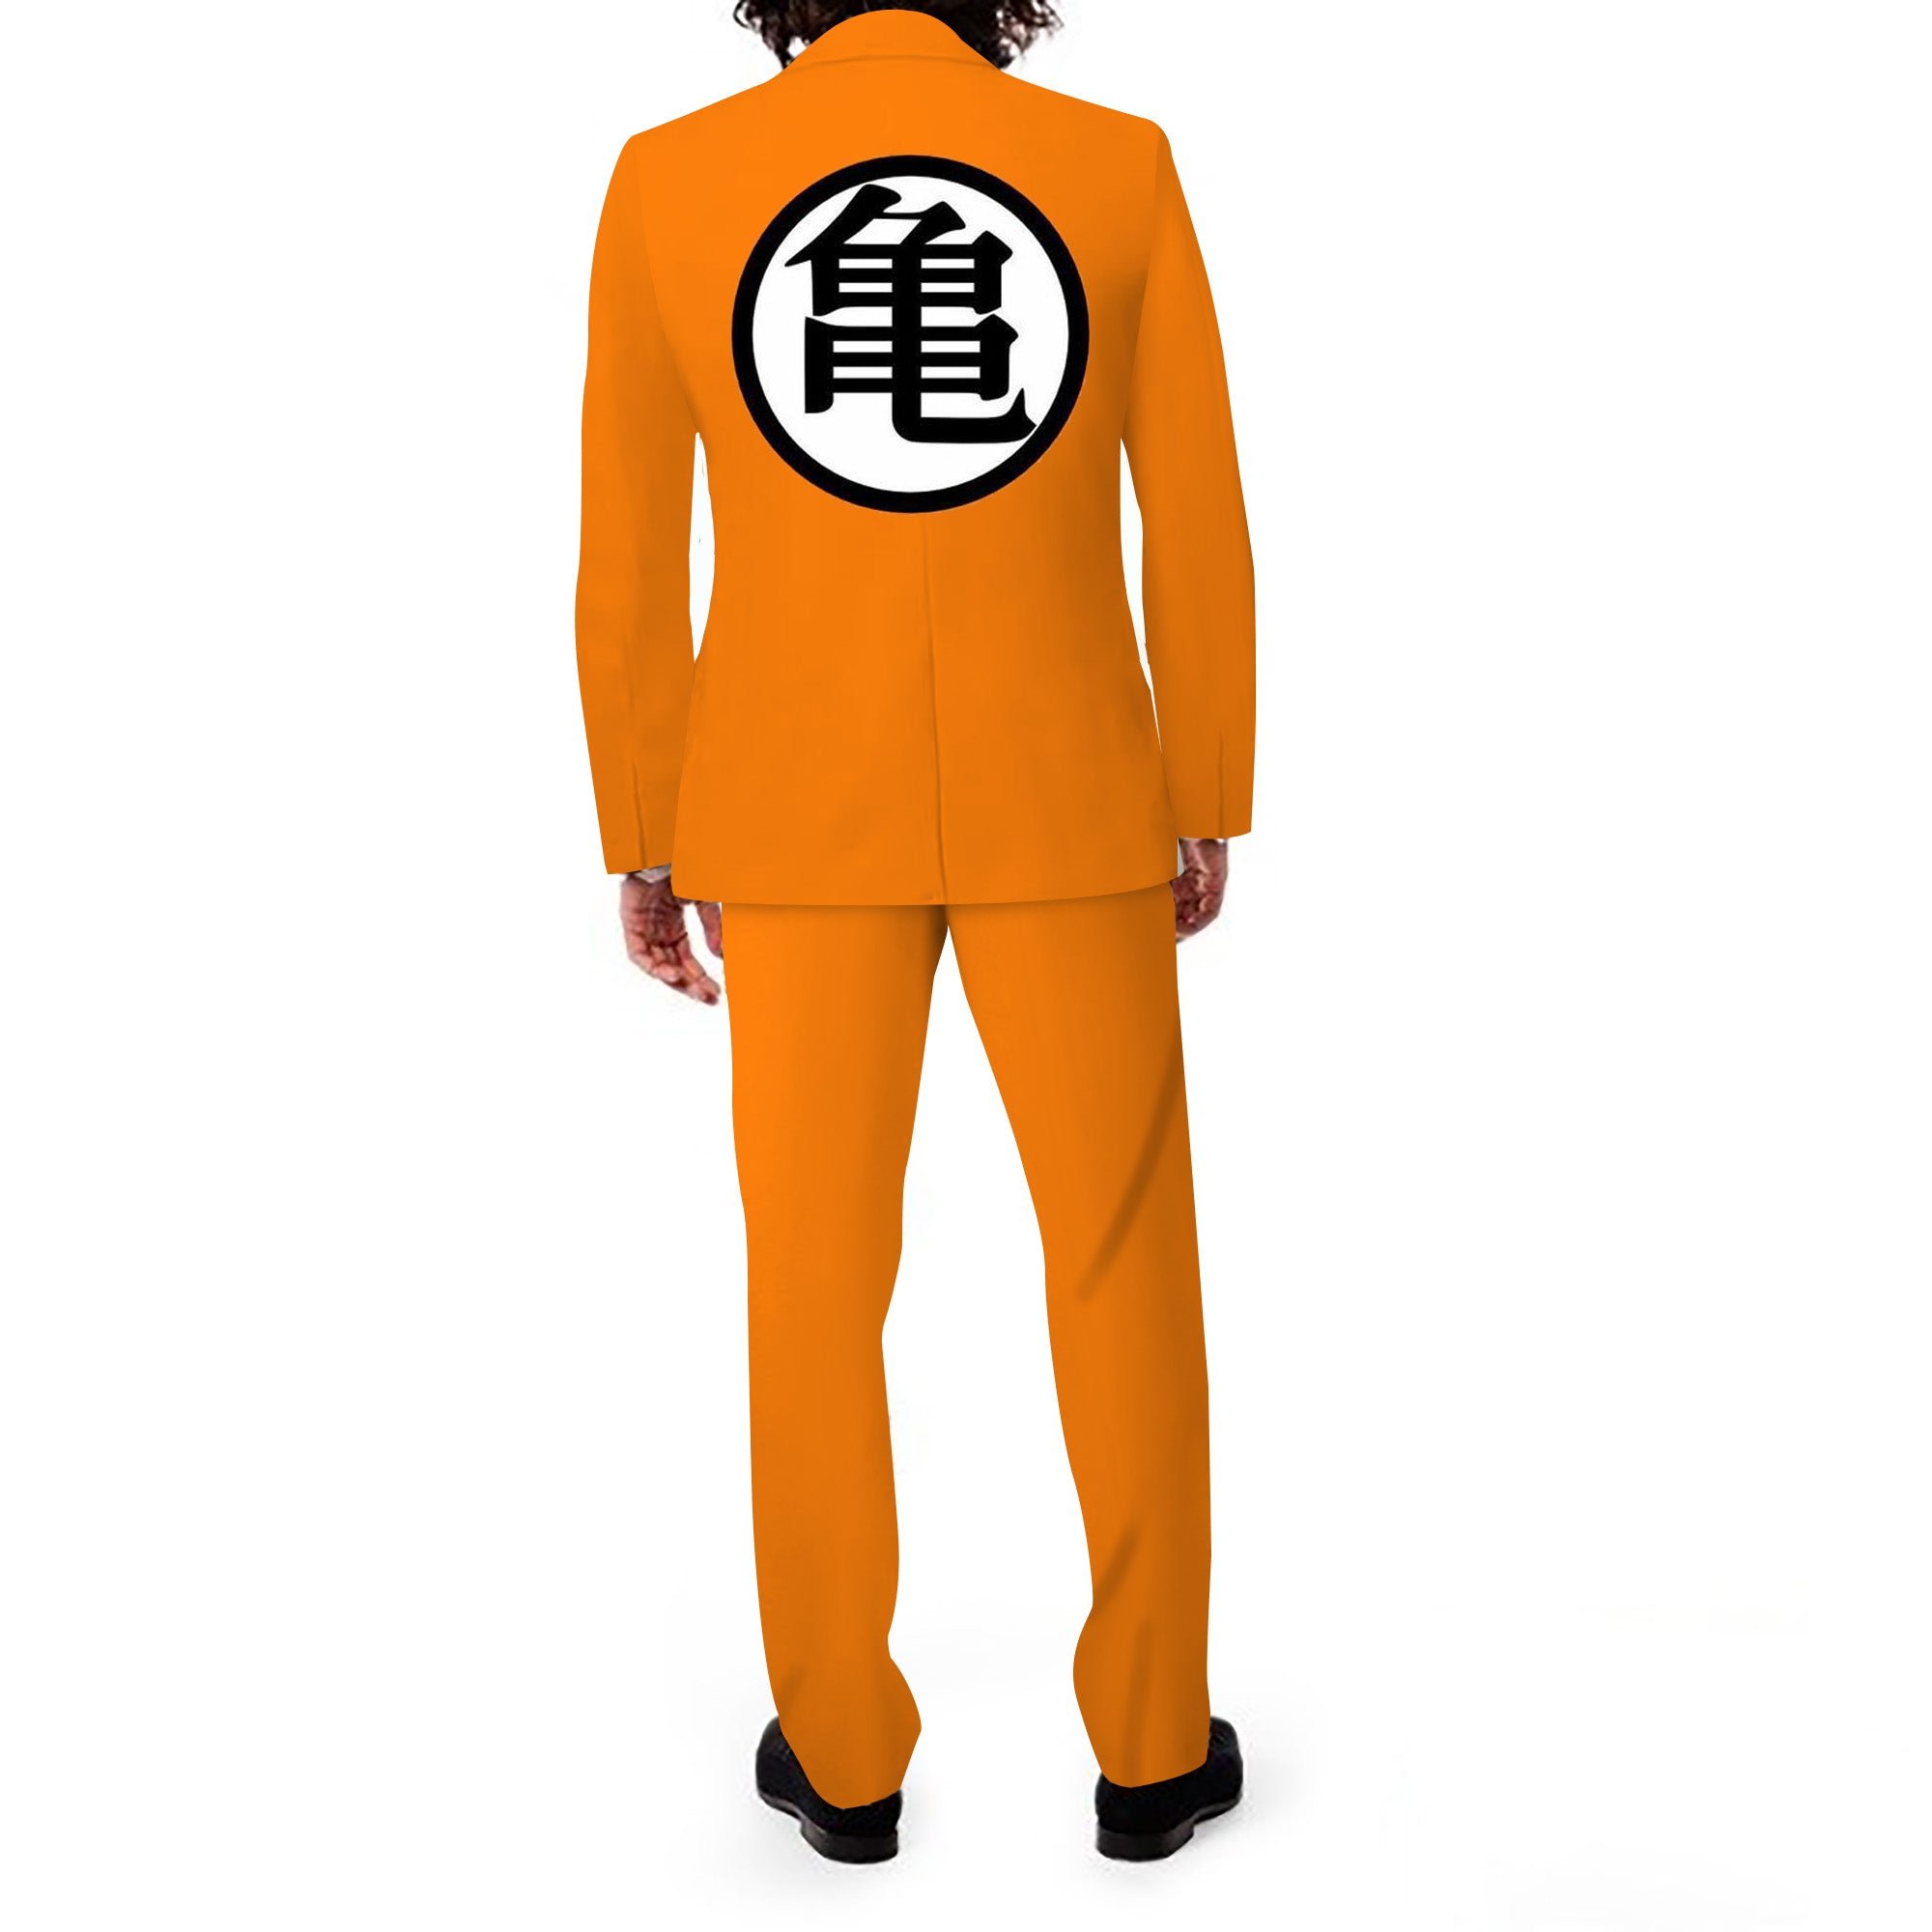 Rulercosplay Dragon Ball Men Slim Fit Suit Separates Jacket Slim 2 Button Blazer Pants For Party